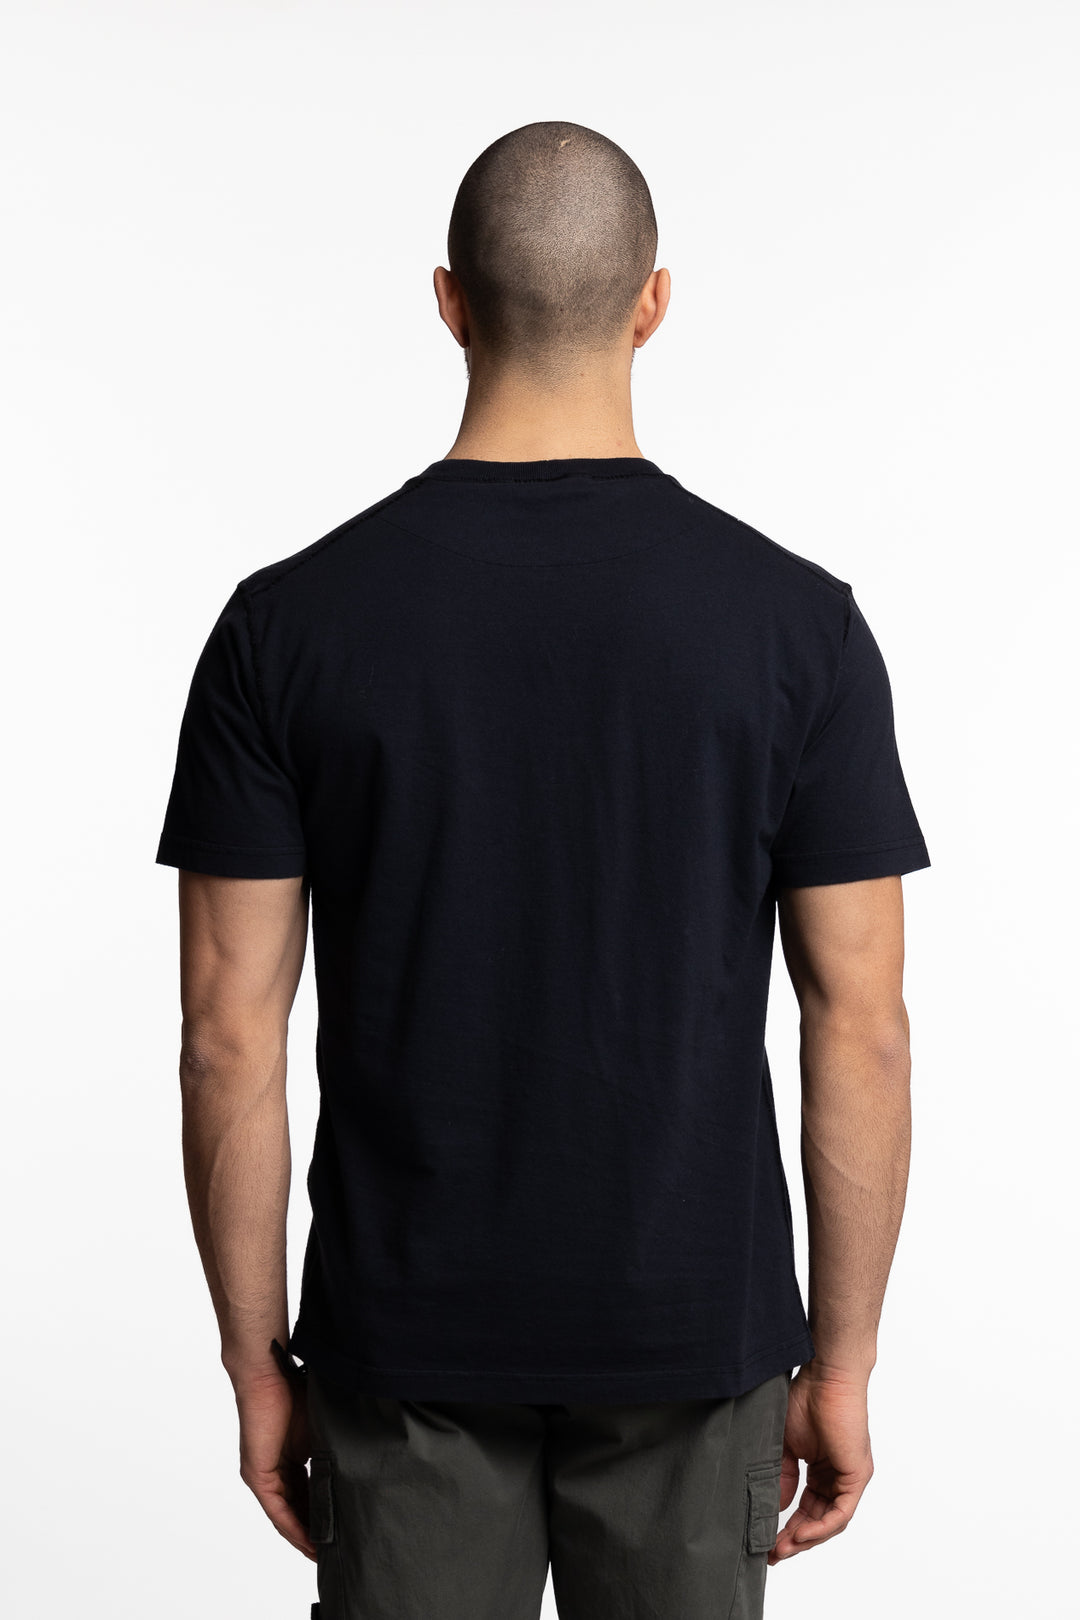 T-Shirt 'OLD' Effect Navy